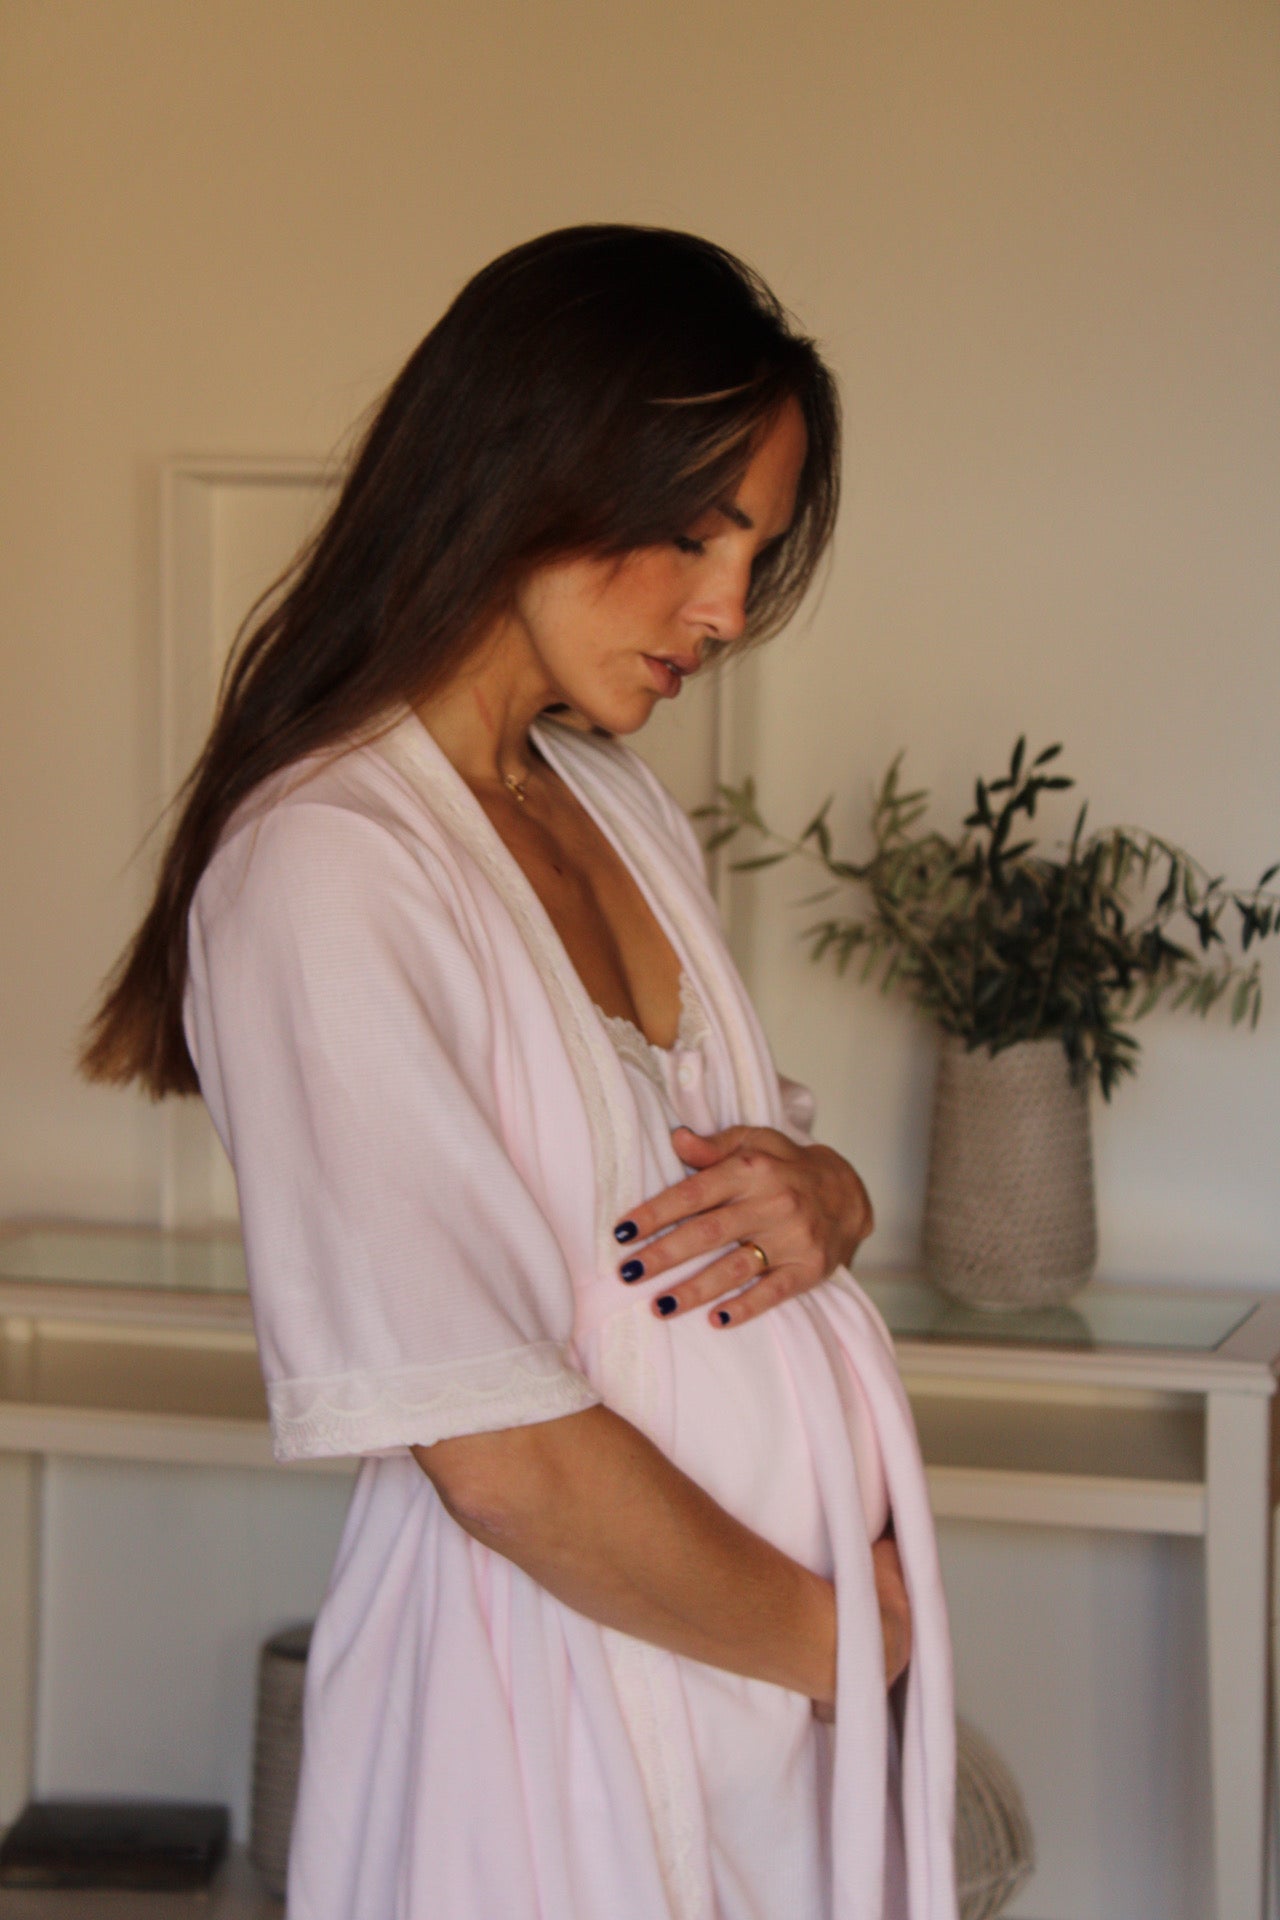 Pink Canalé Maternity Nightgown Beige Lace 